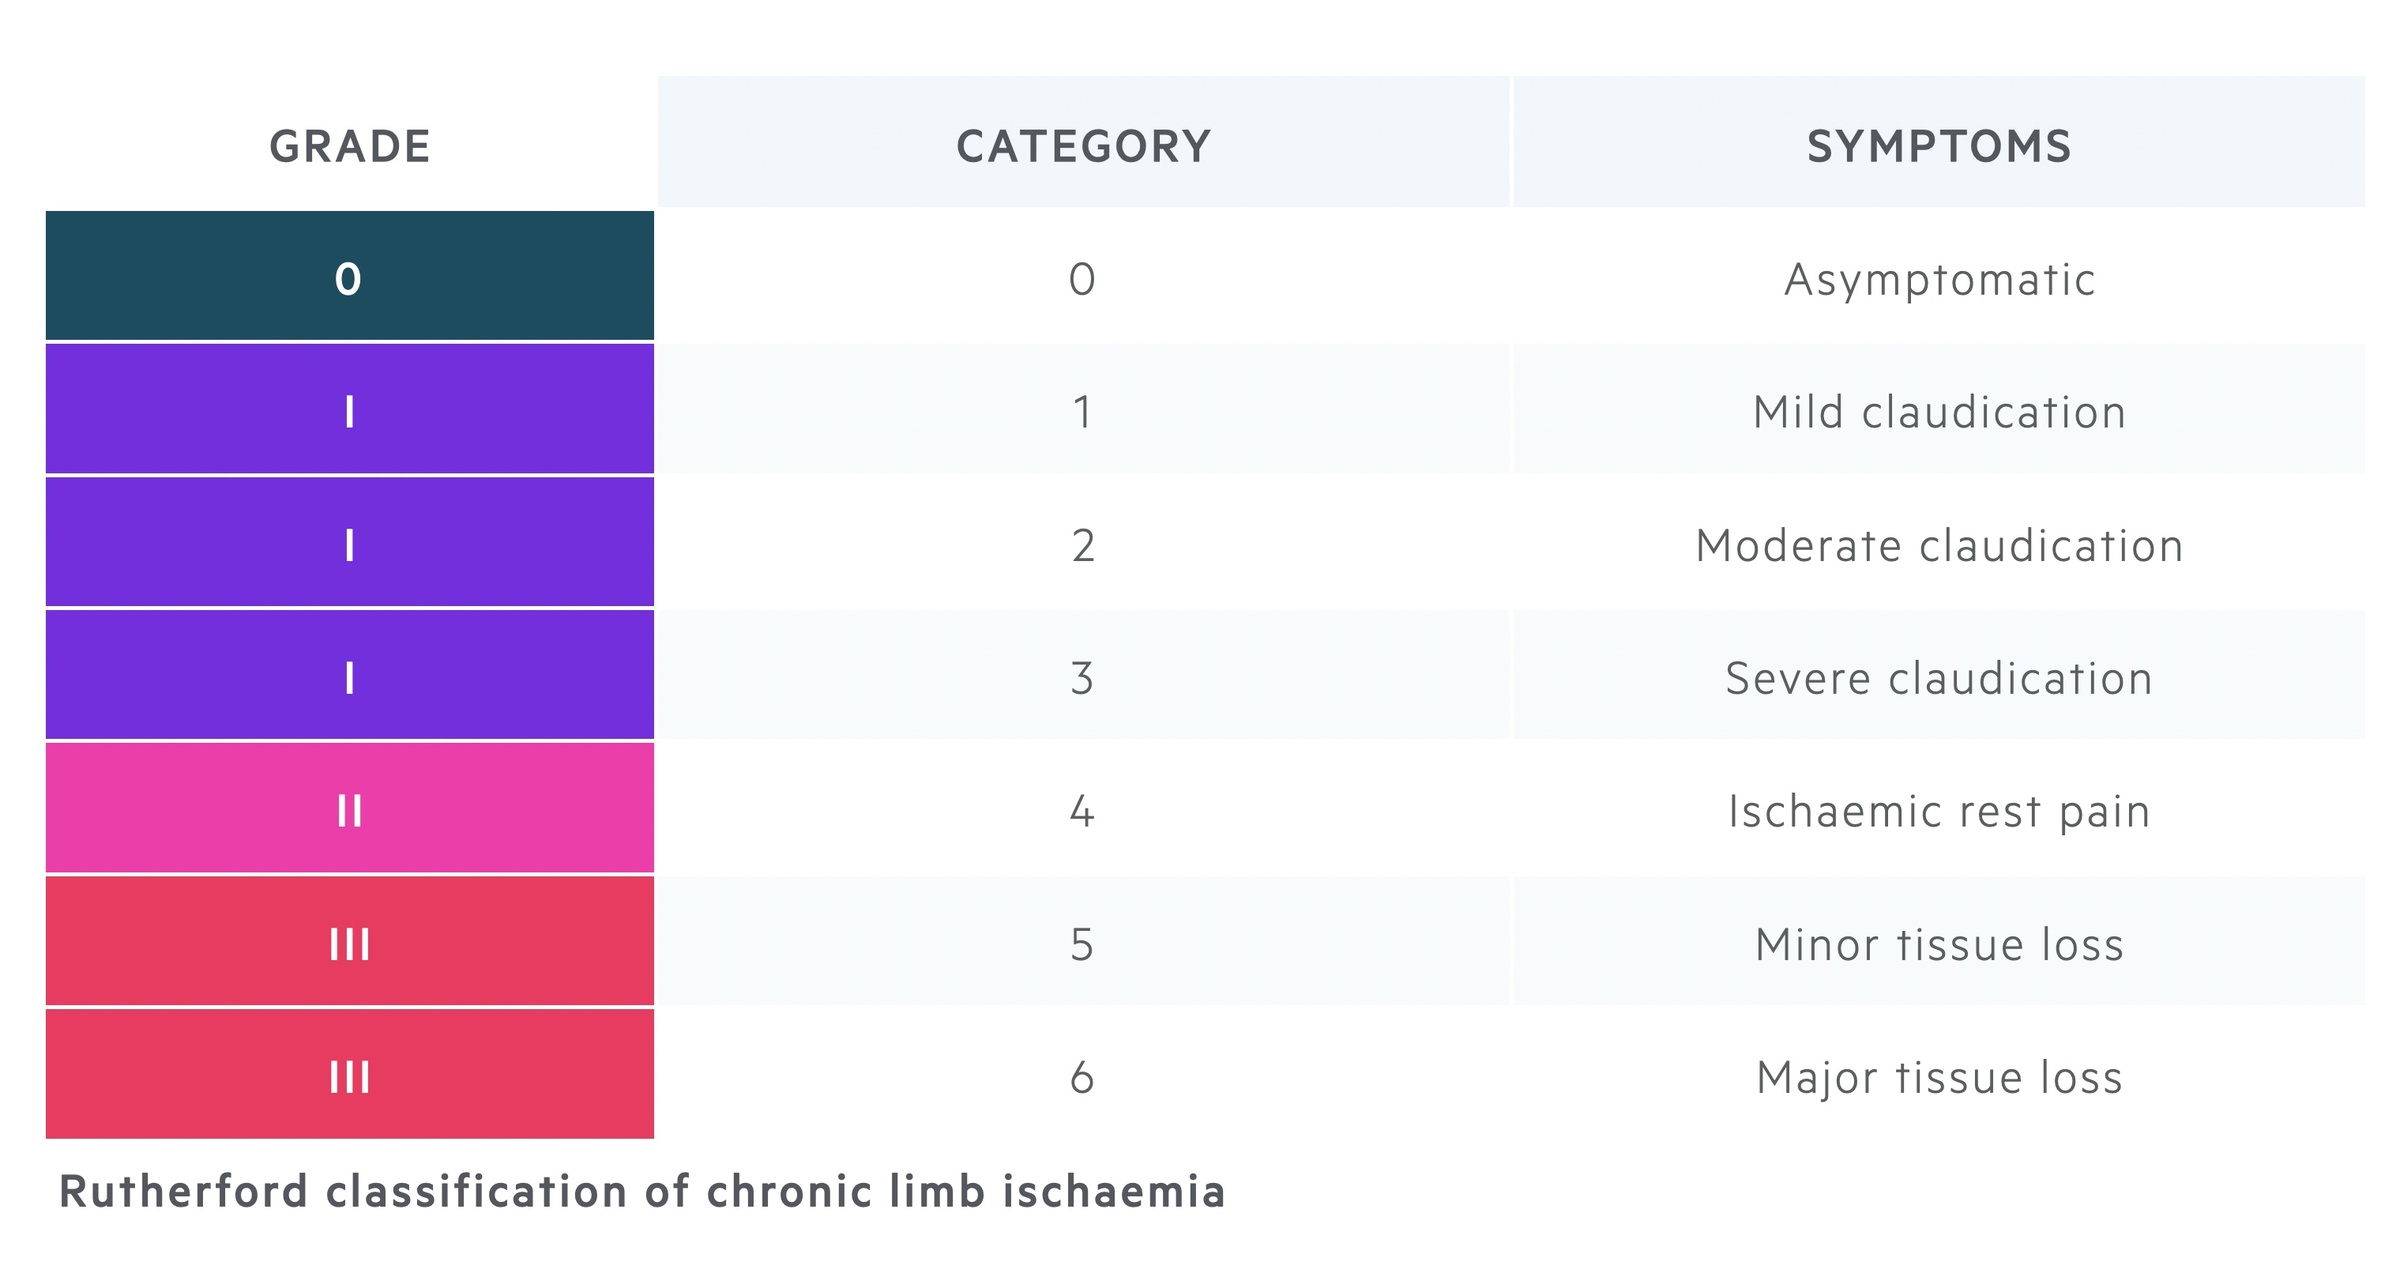 Rutherford classification of chronic limb ischaemia